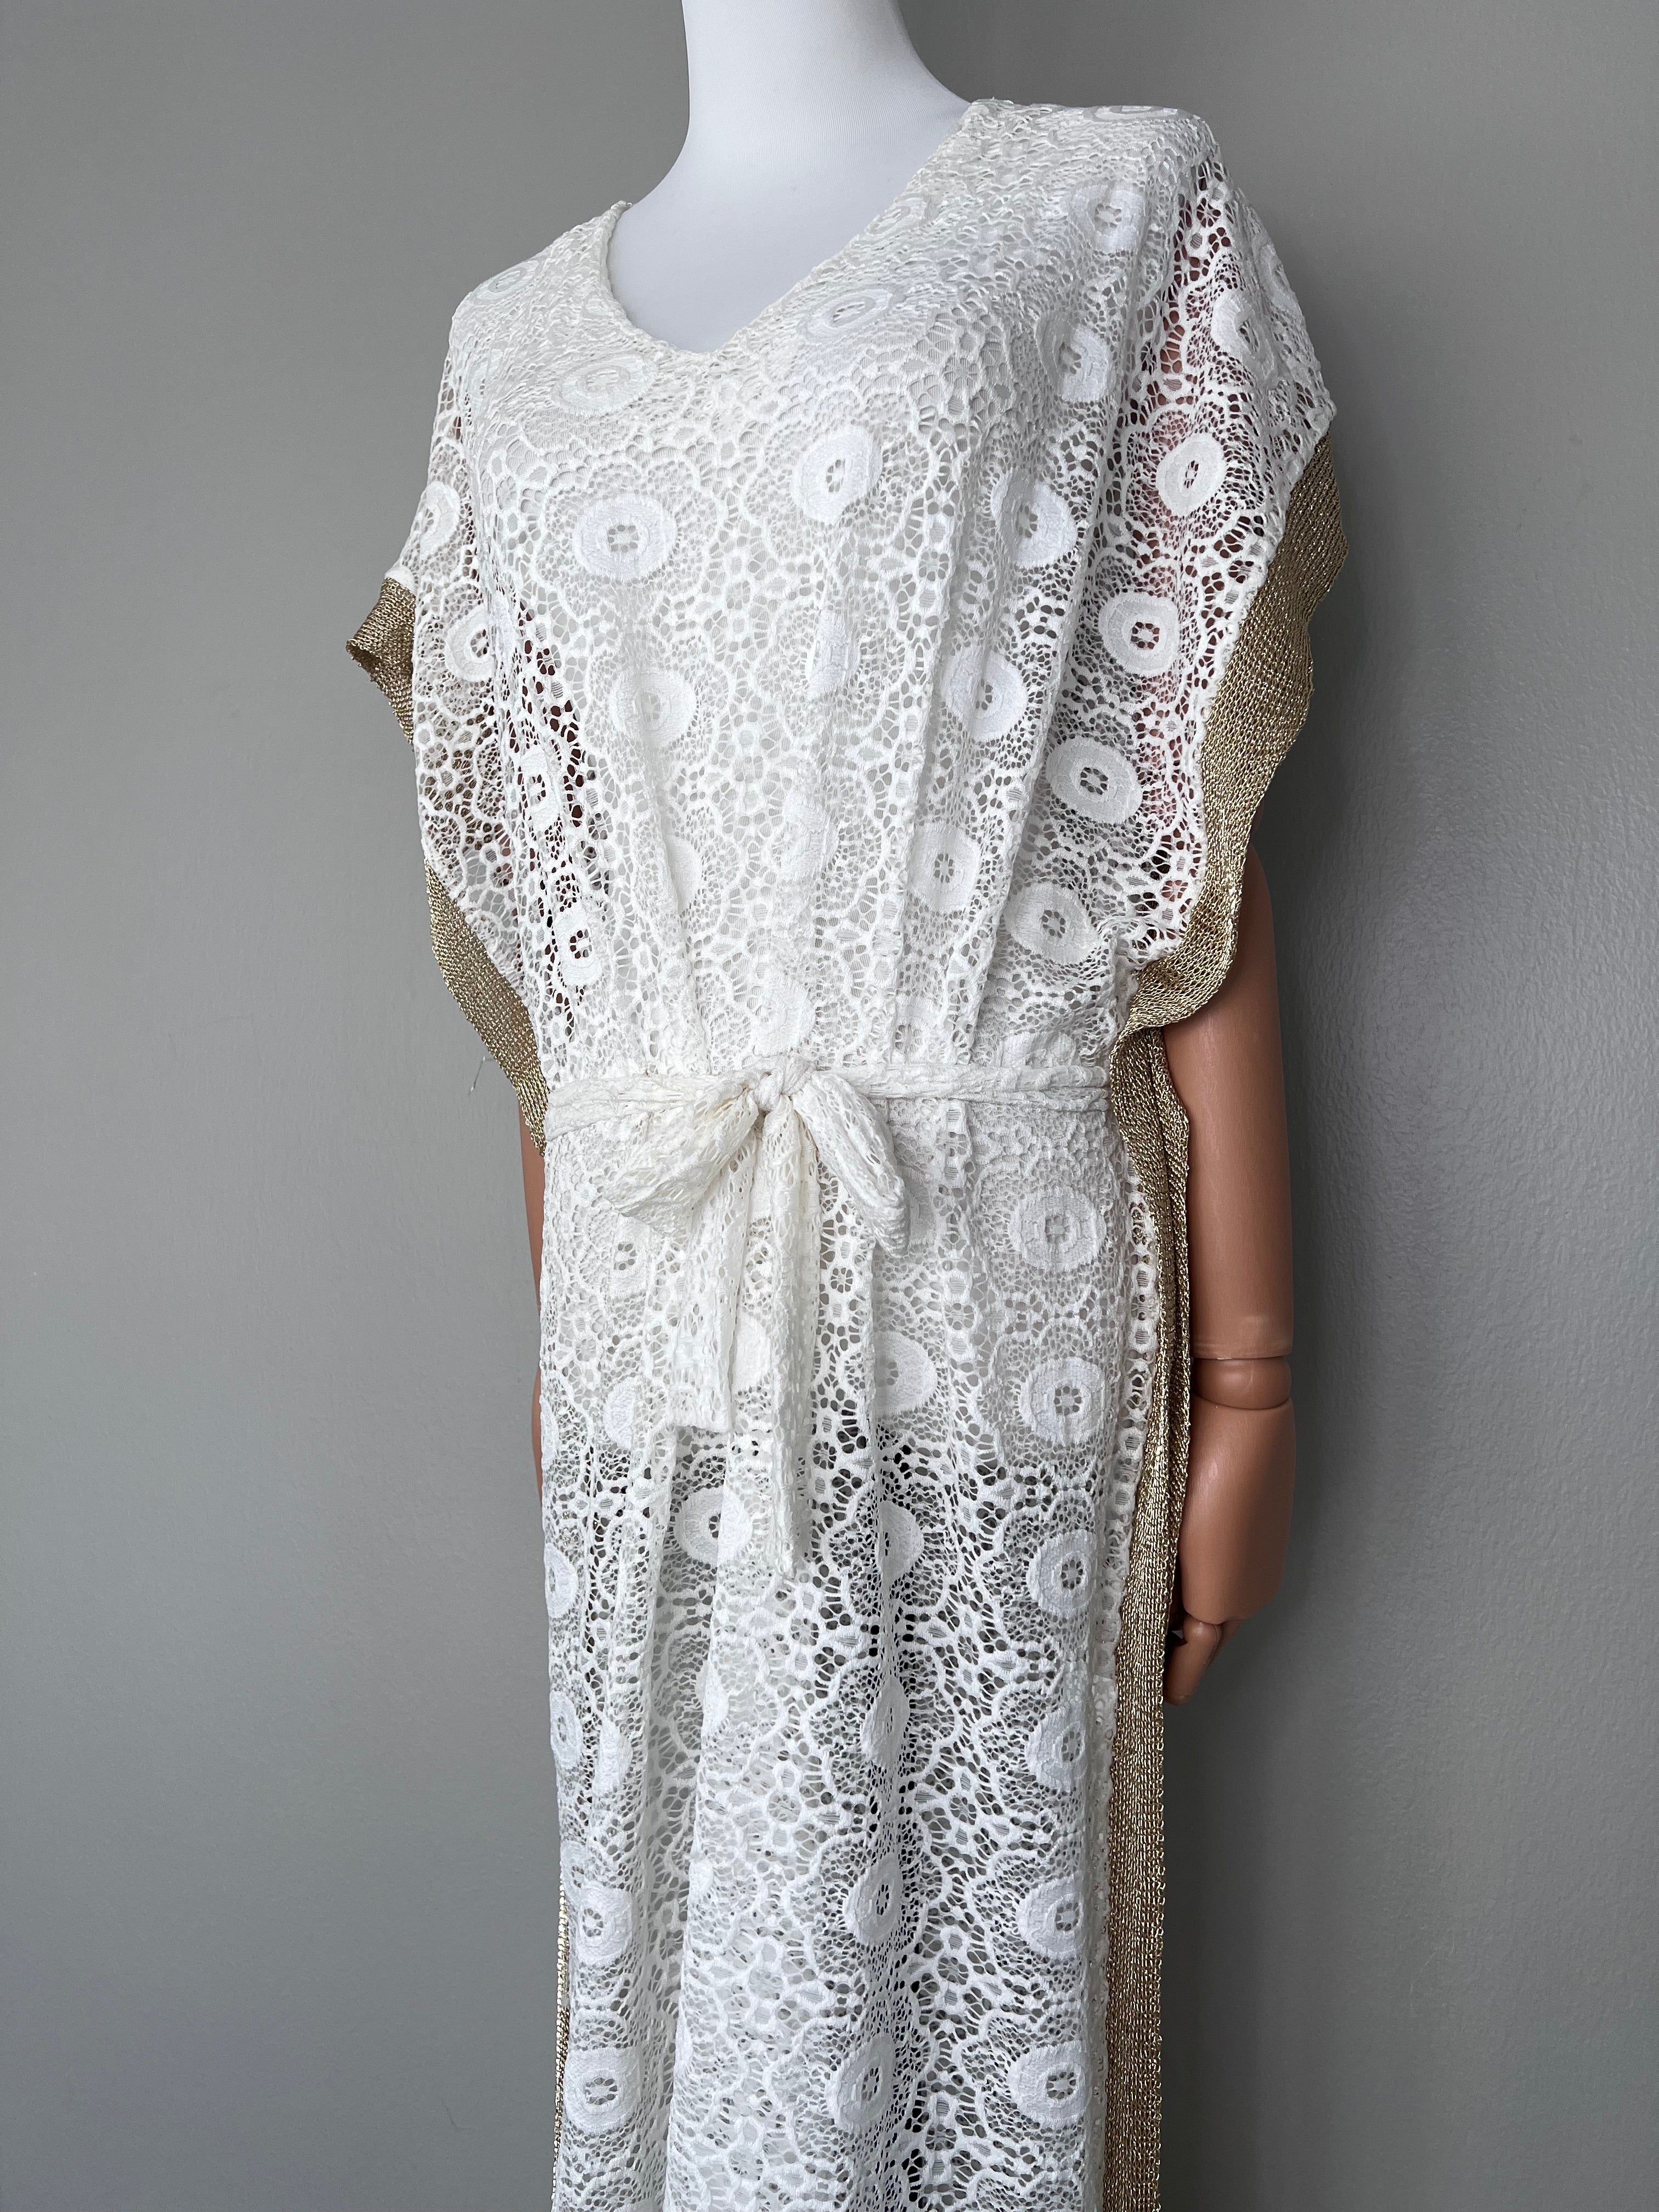 White widebody cotton sheer dress - MARK'S THER